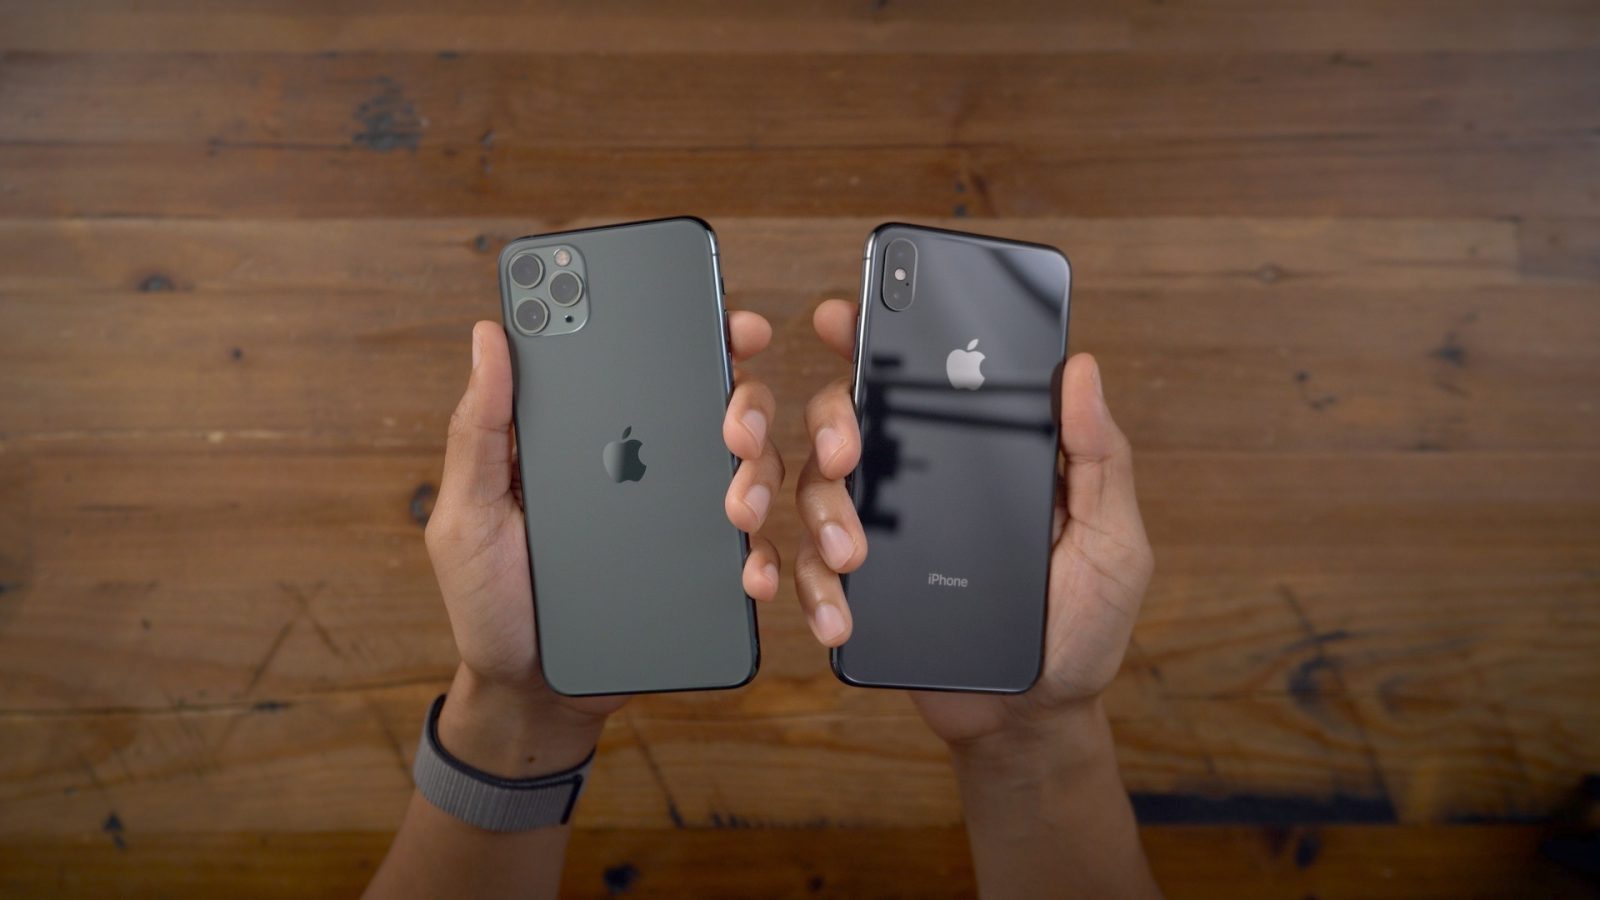 iPhone 11 Pro and iPhone XS Max